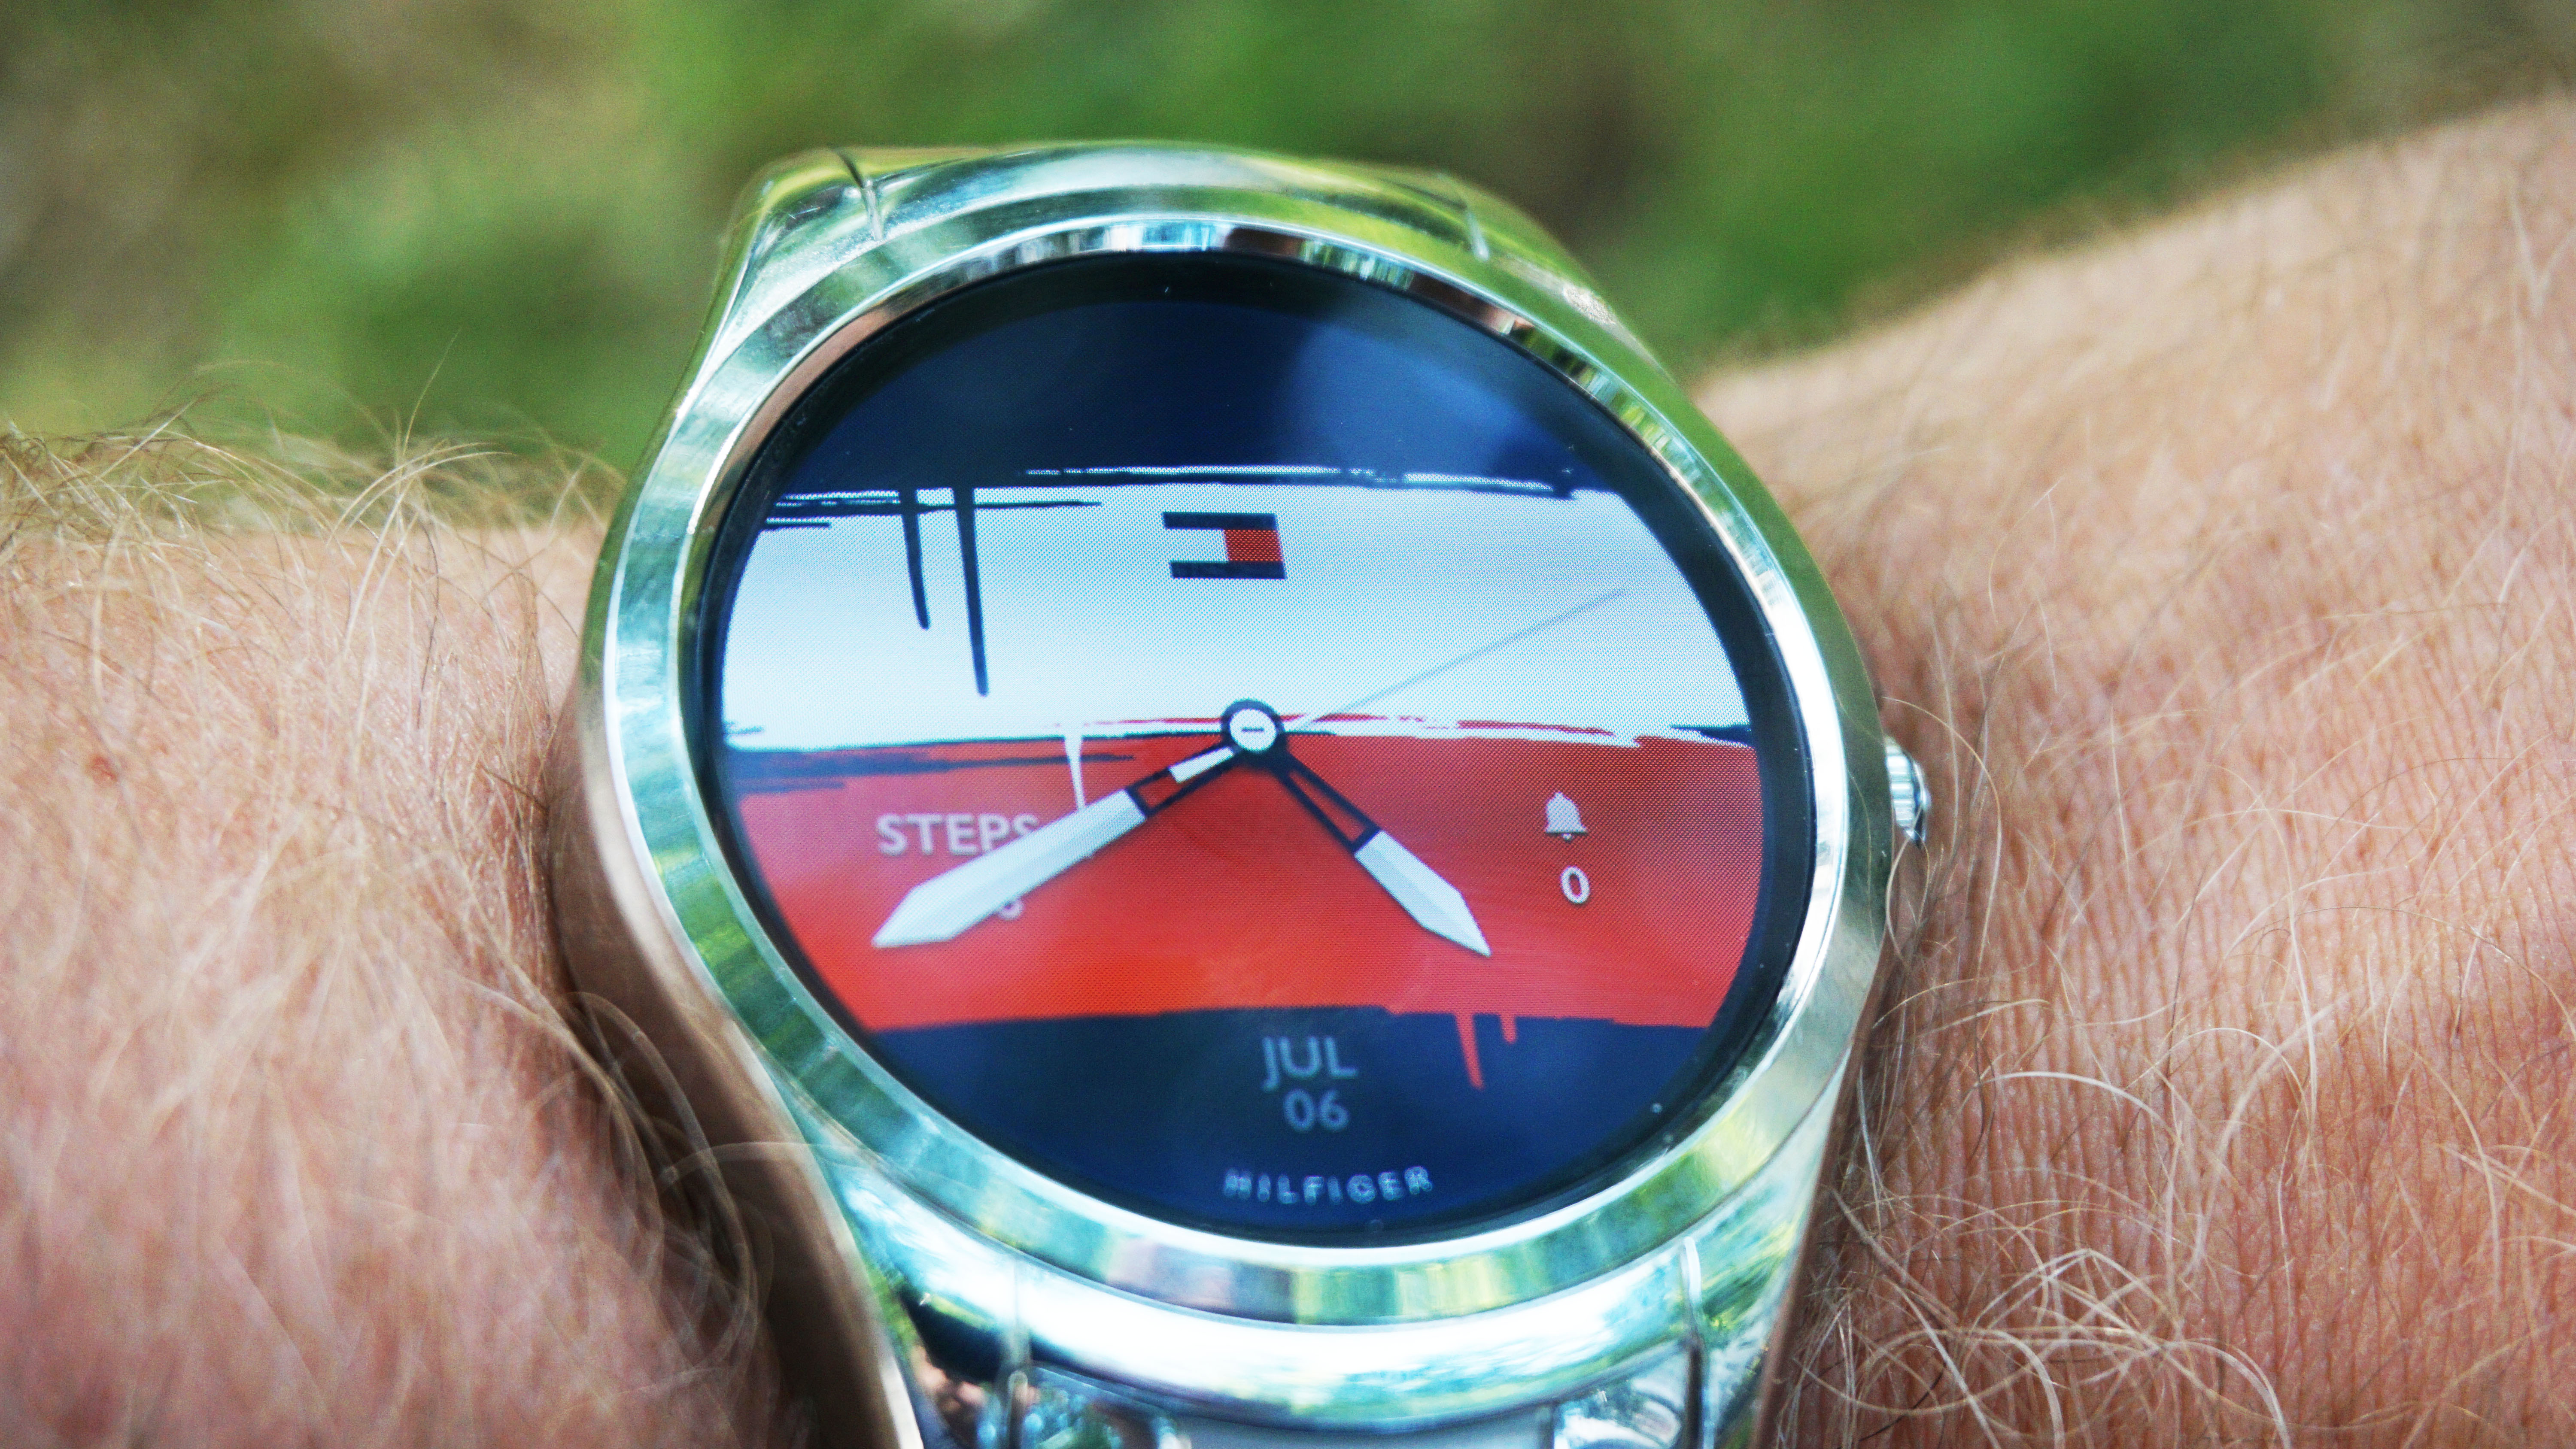 tommy hilfiger android watch